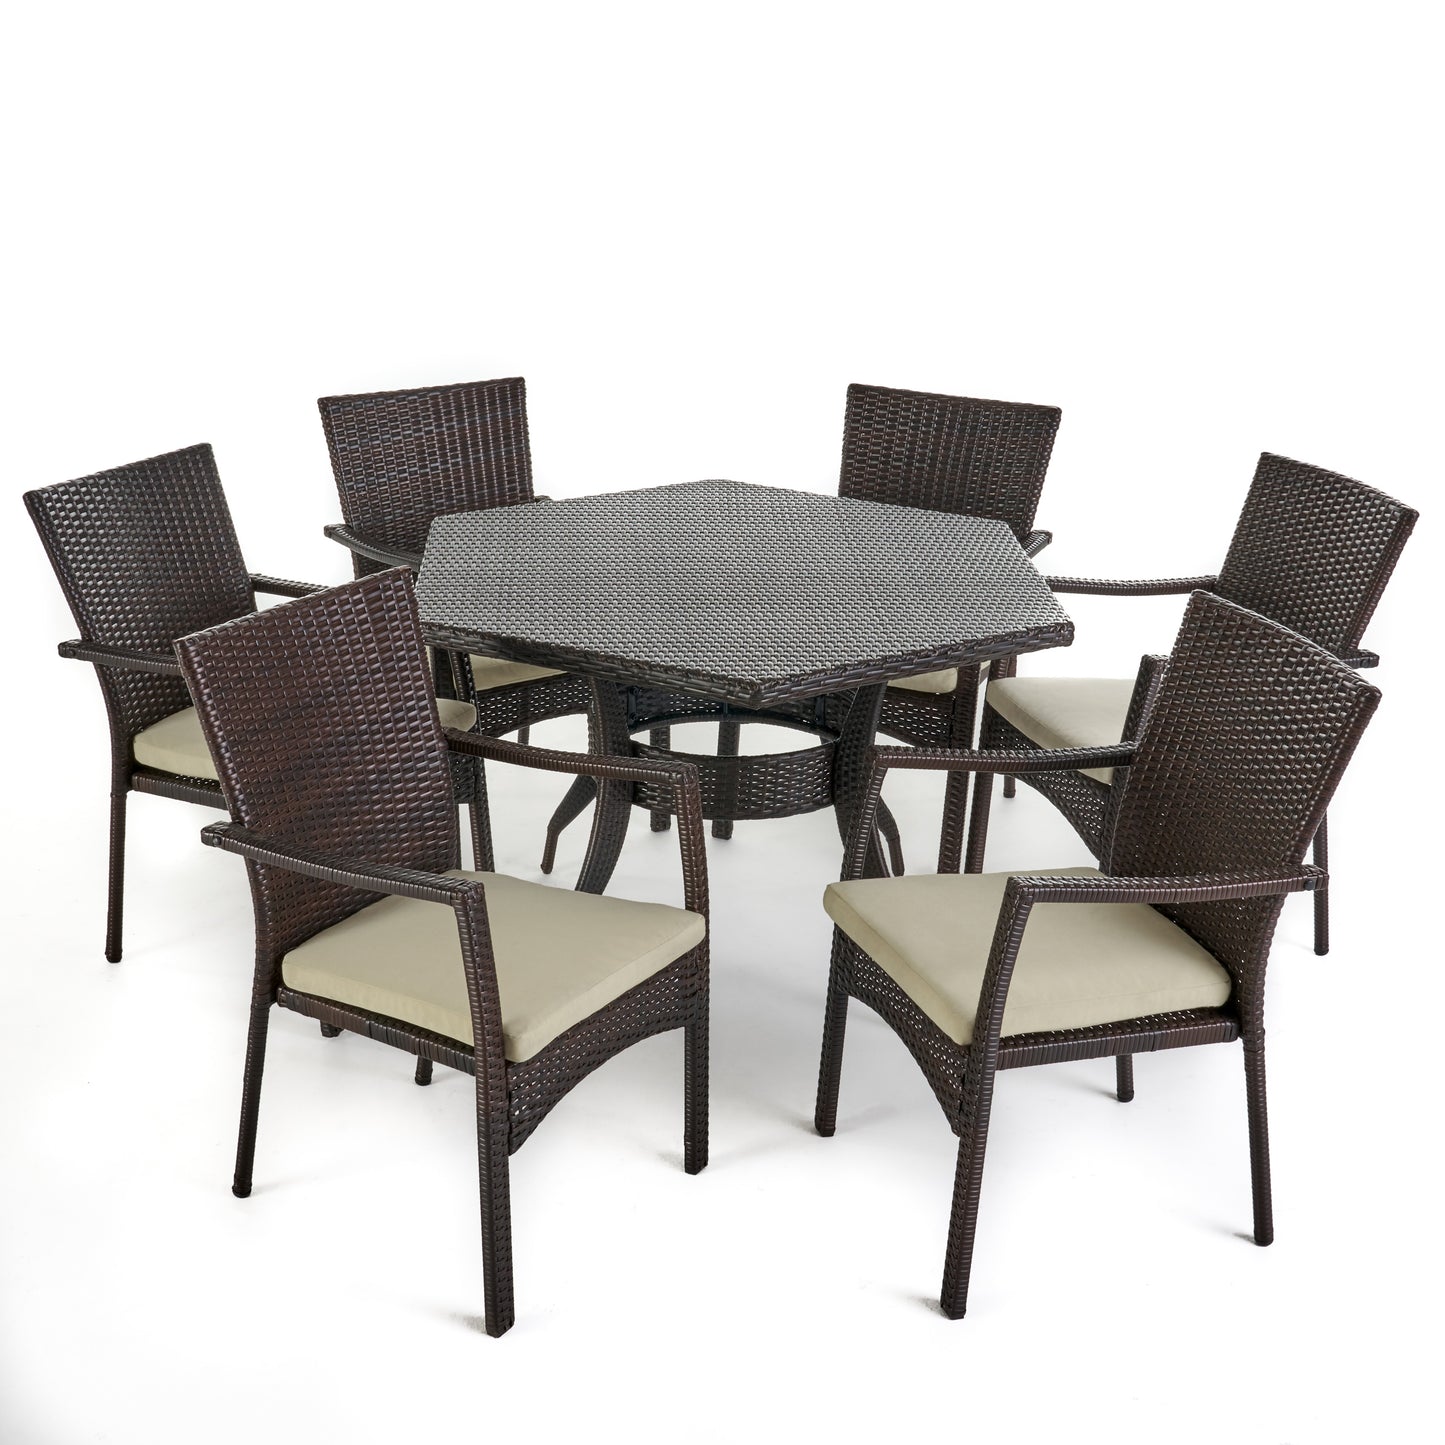 Bartley Outdoor 7 Piece Wicker Hexagon Dining Set with Brown Wicker Chairs